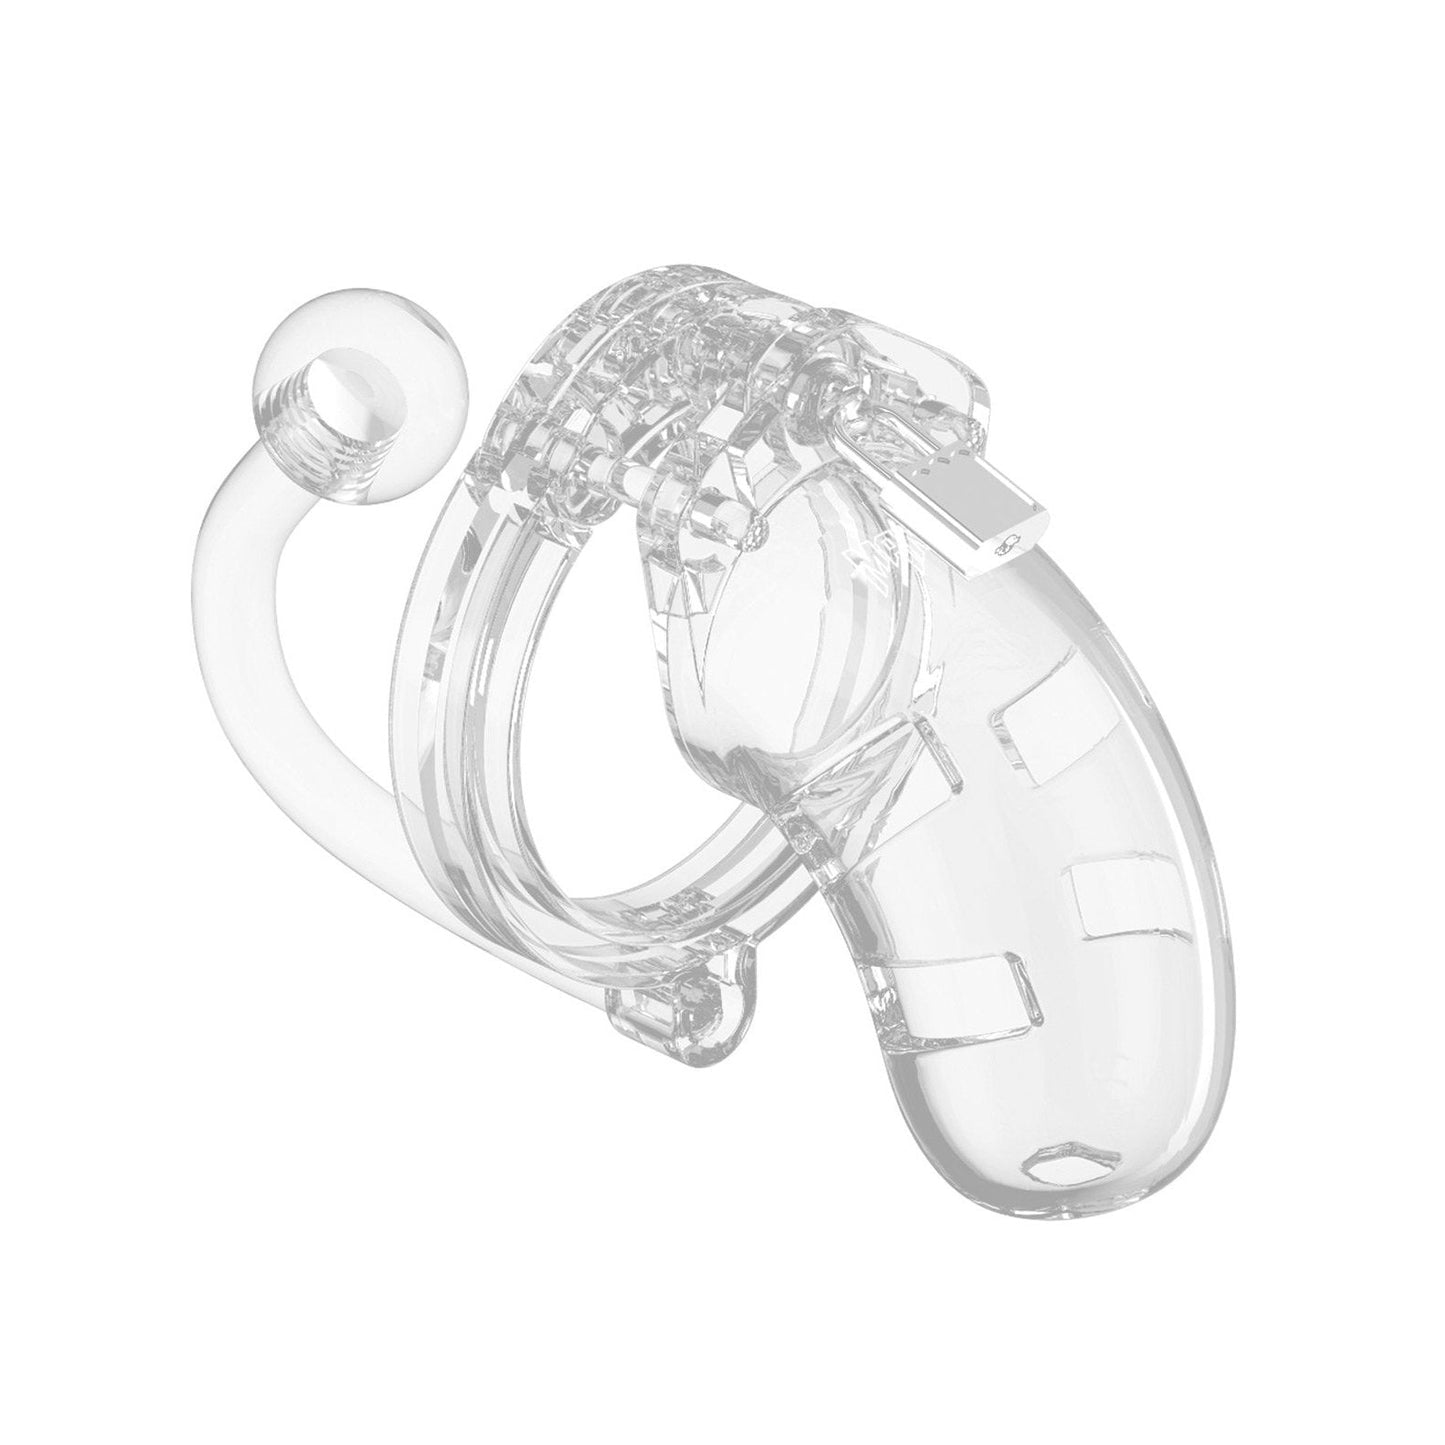 Shots Man Cage Chastity 3.5 Cock Cage with Plug Model 10